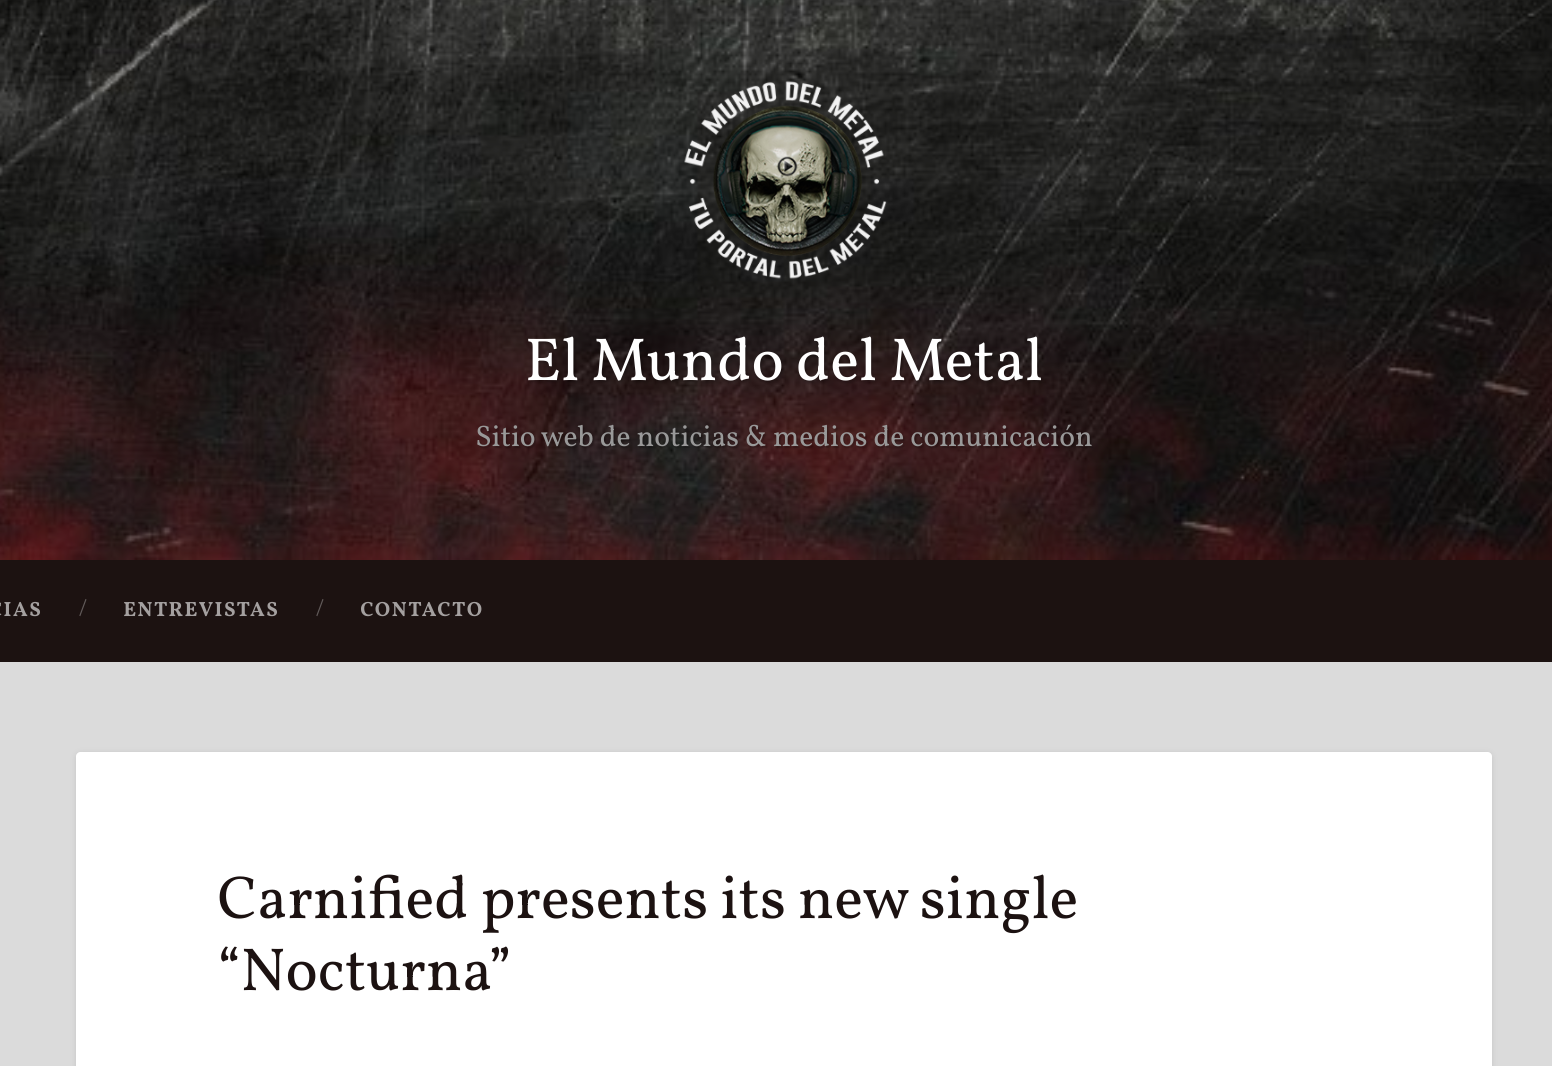 Carnified presents its new single “Nocturna”